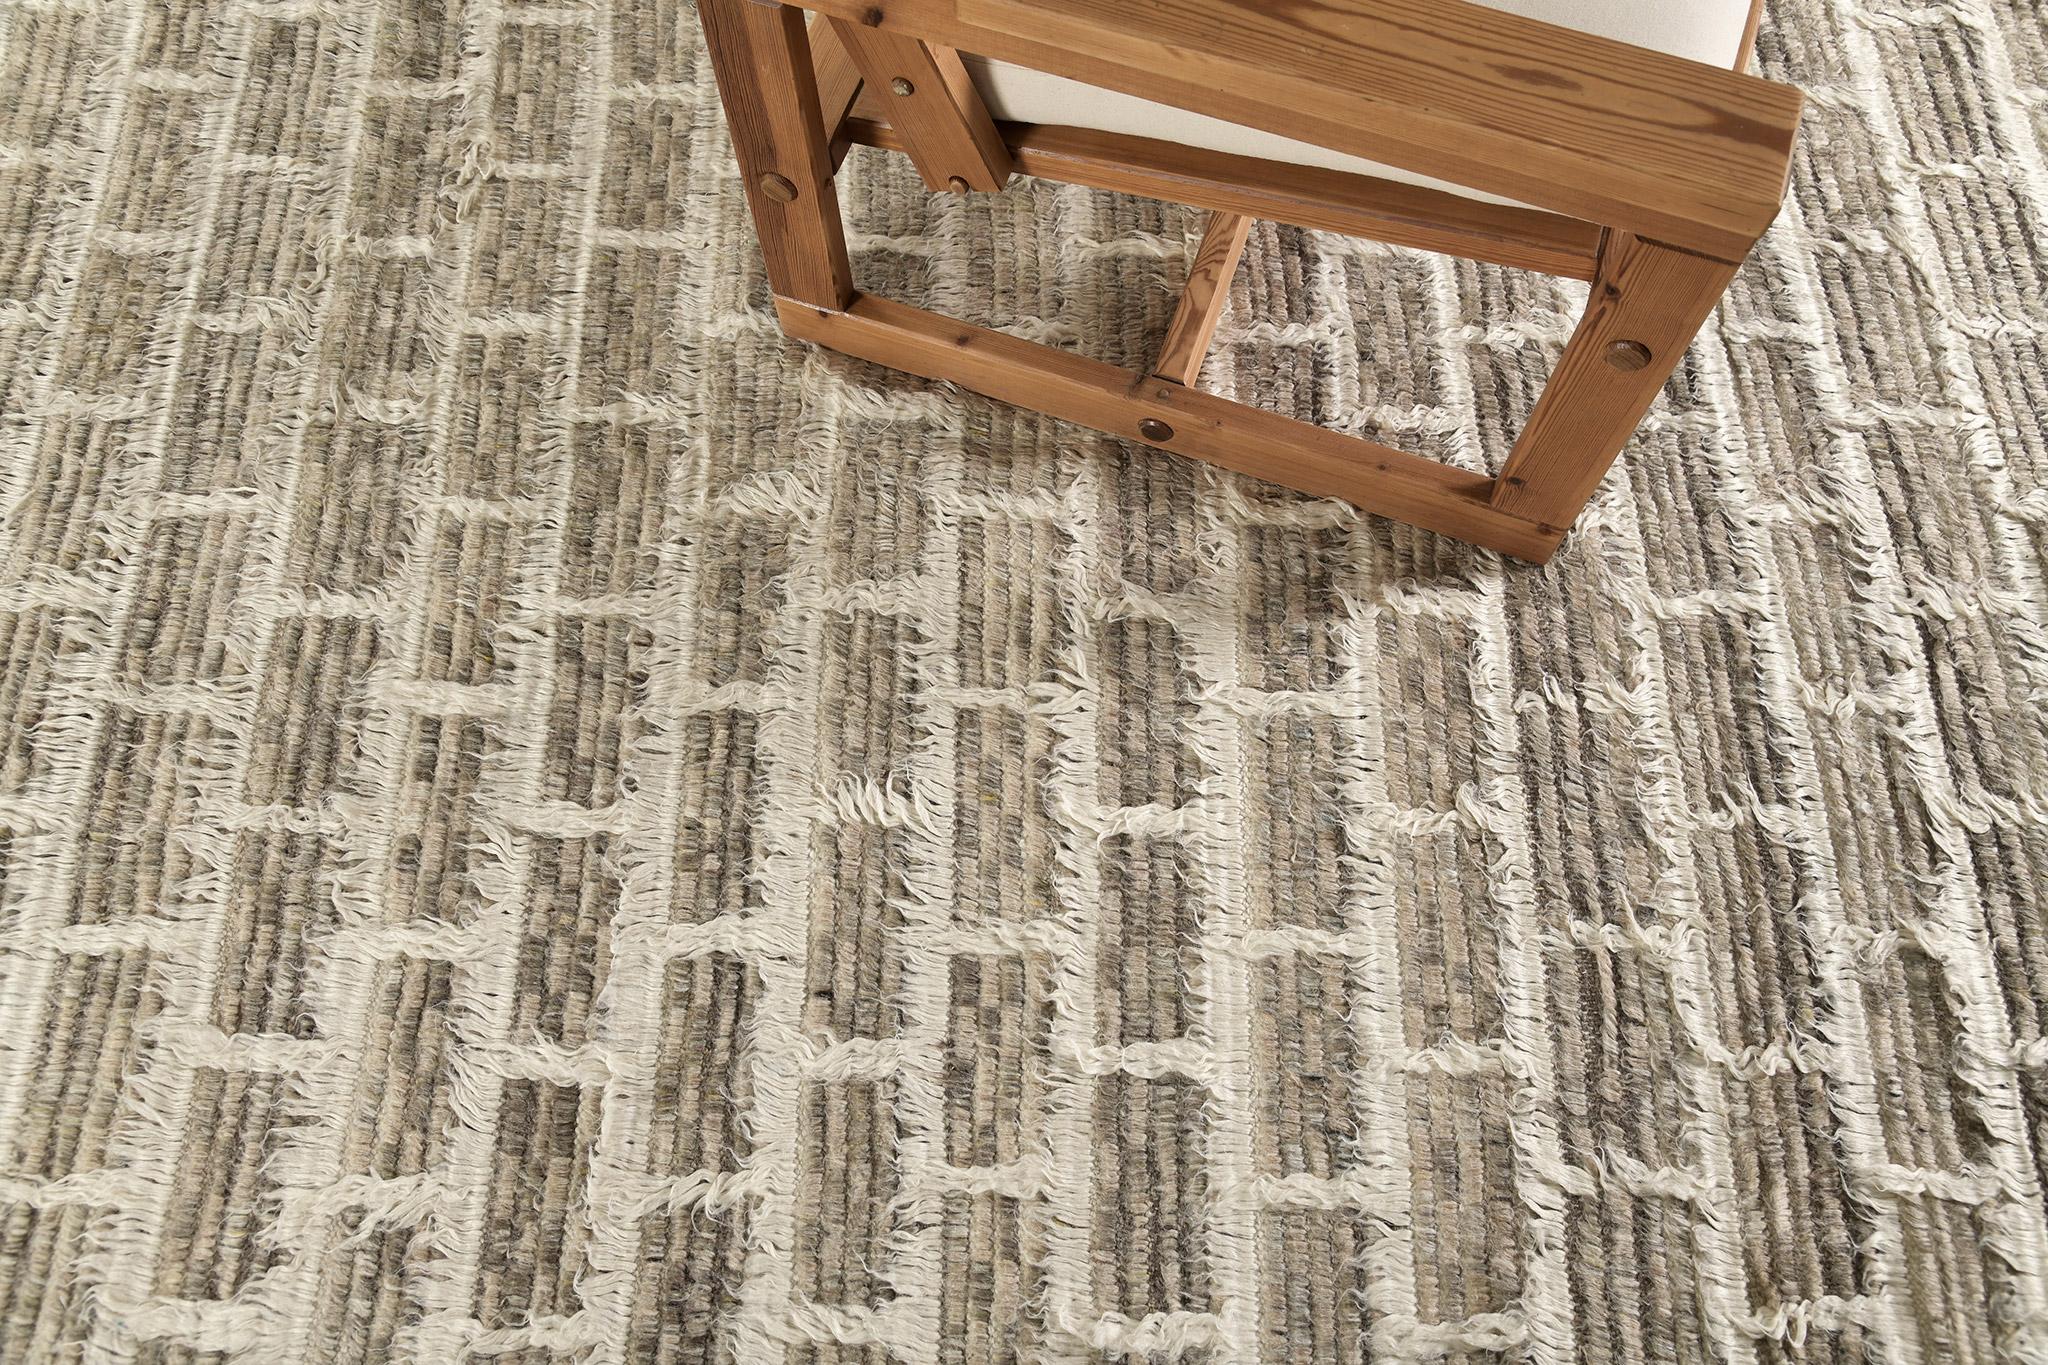 In the Ahina rug, a rectangular grid frames a field of dappled pile tones. This piece combines ivory lines with heathered clay and taupe tones. 

Hand knotted of hand-spun wool, the Sahara Collection melds linear organization with a relaxed organic